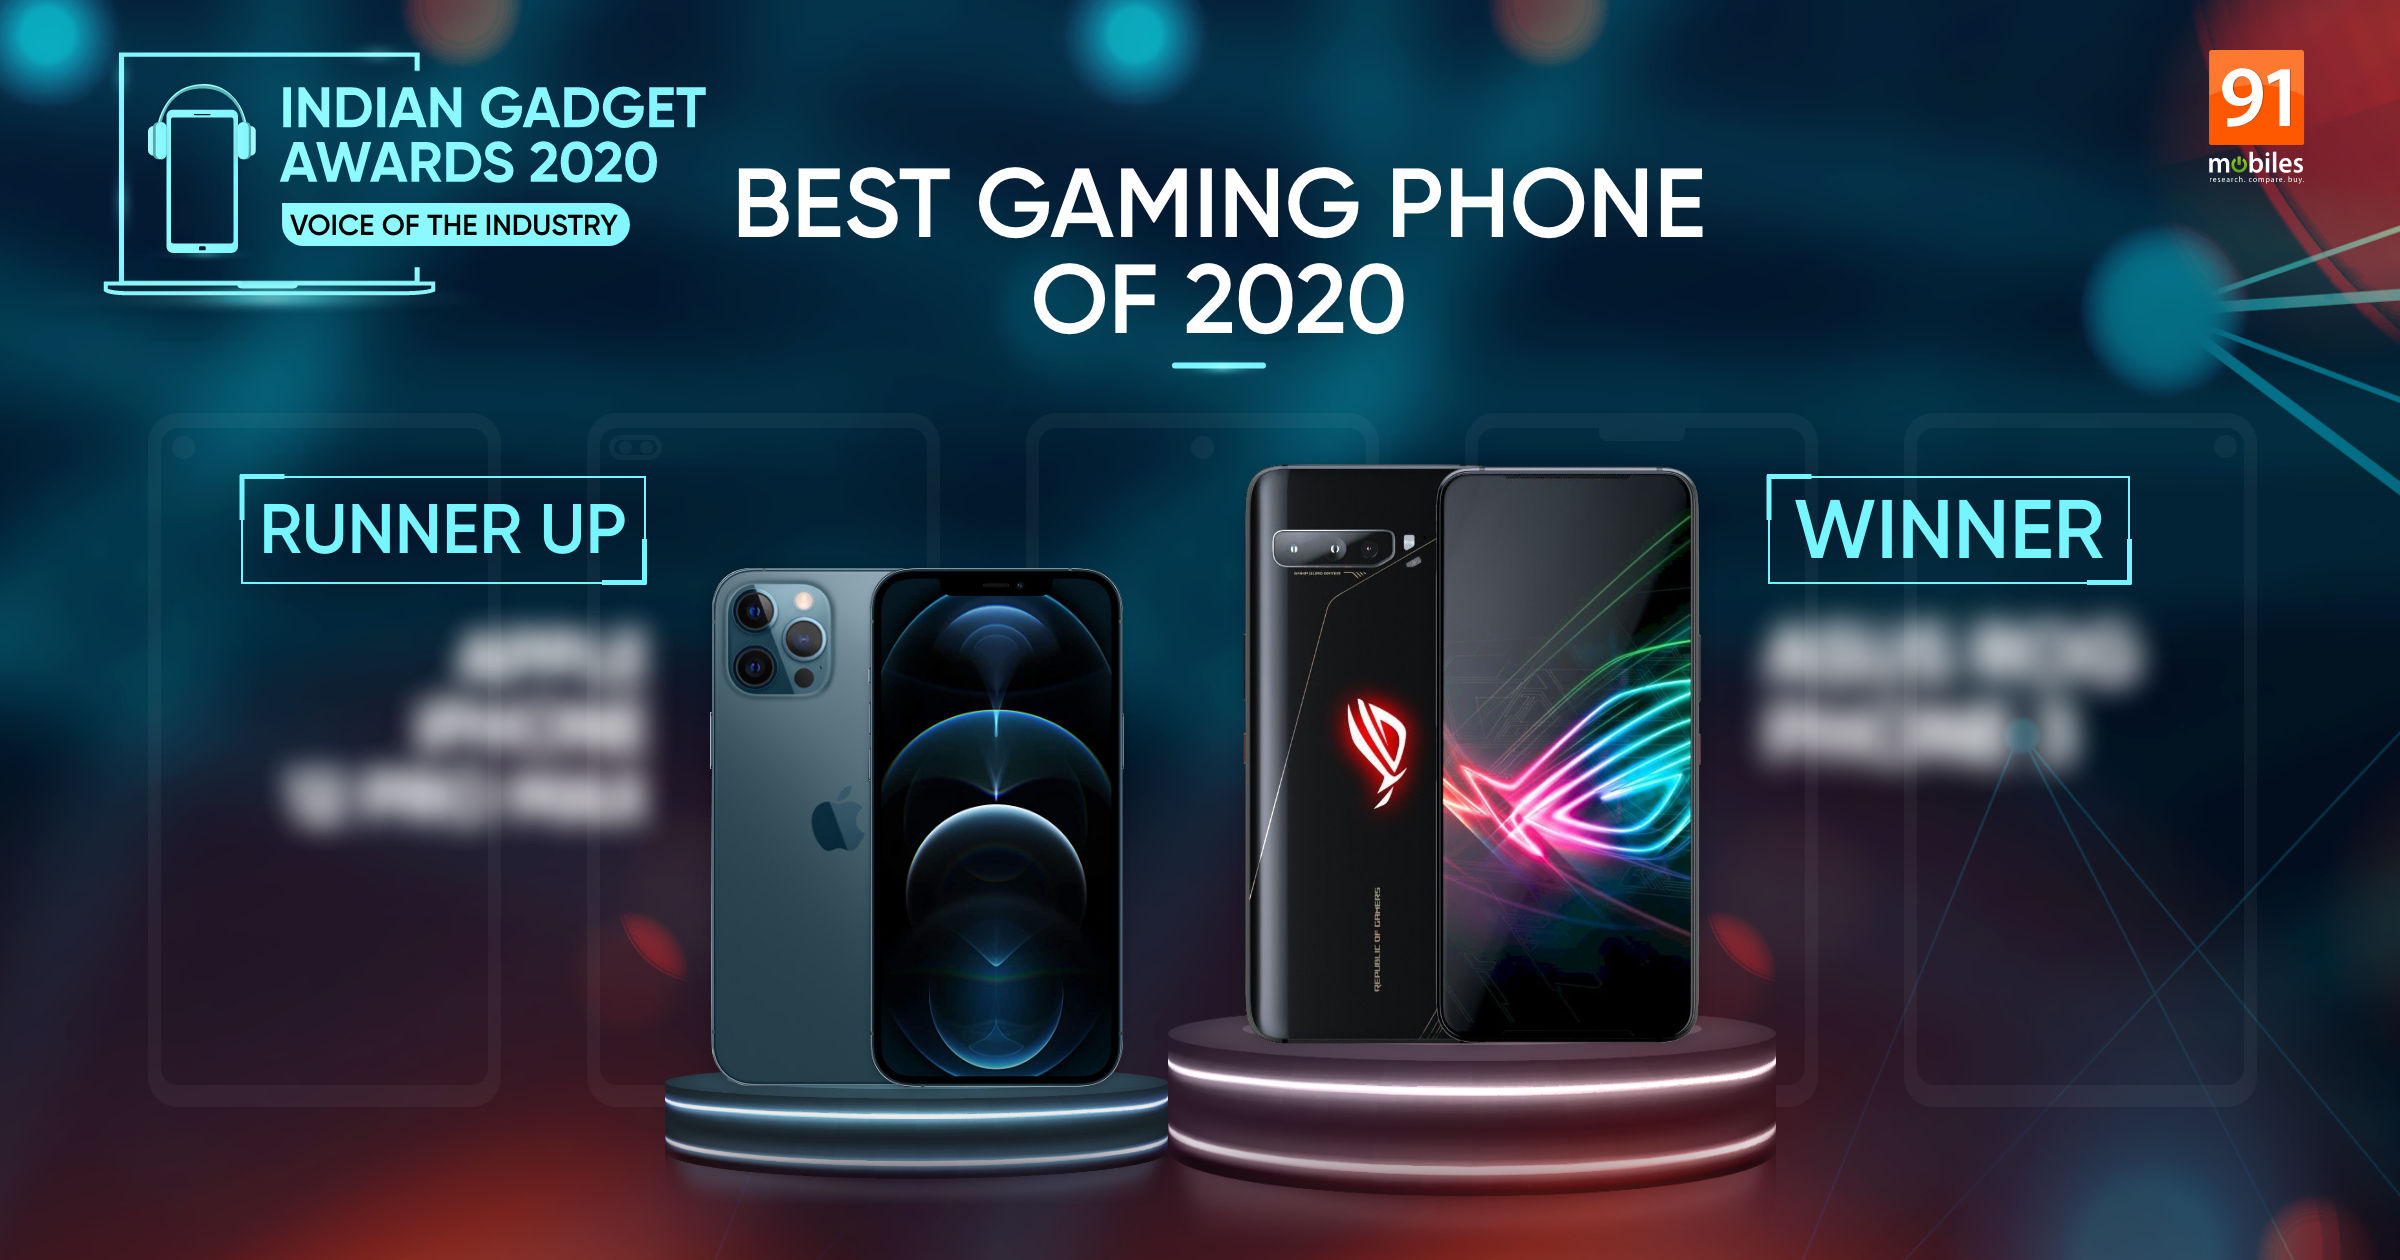 Who wins the tough fight between ASUS ROG Phone 3 and iPhone 12 Pro Max for Best Gaming Phone of 2020 title at Indian Gadget Awards?